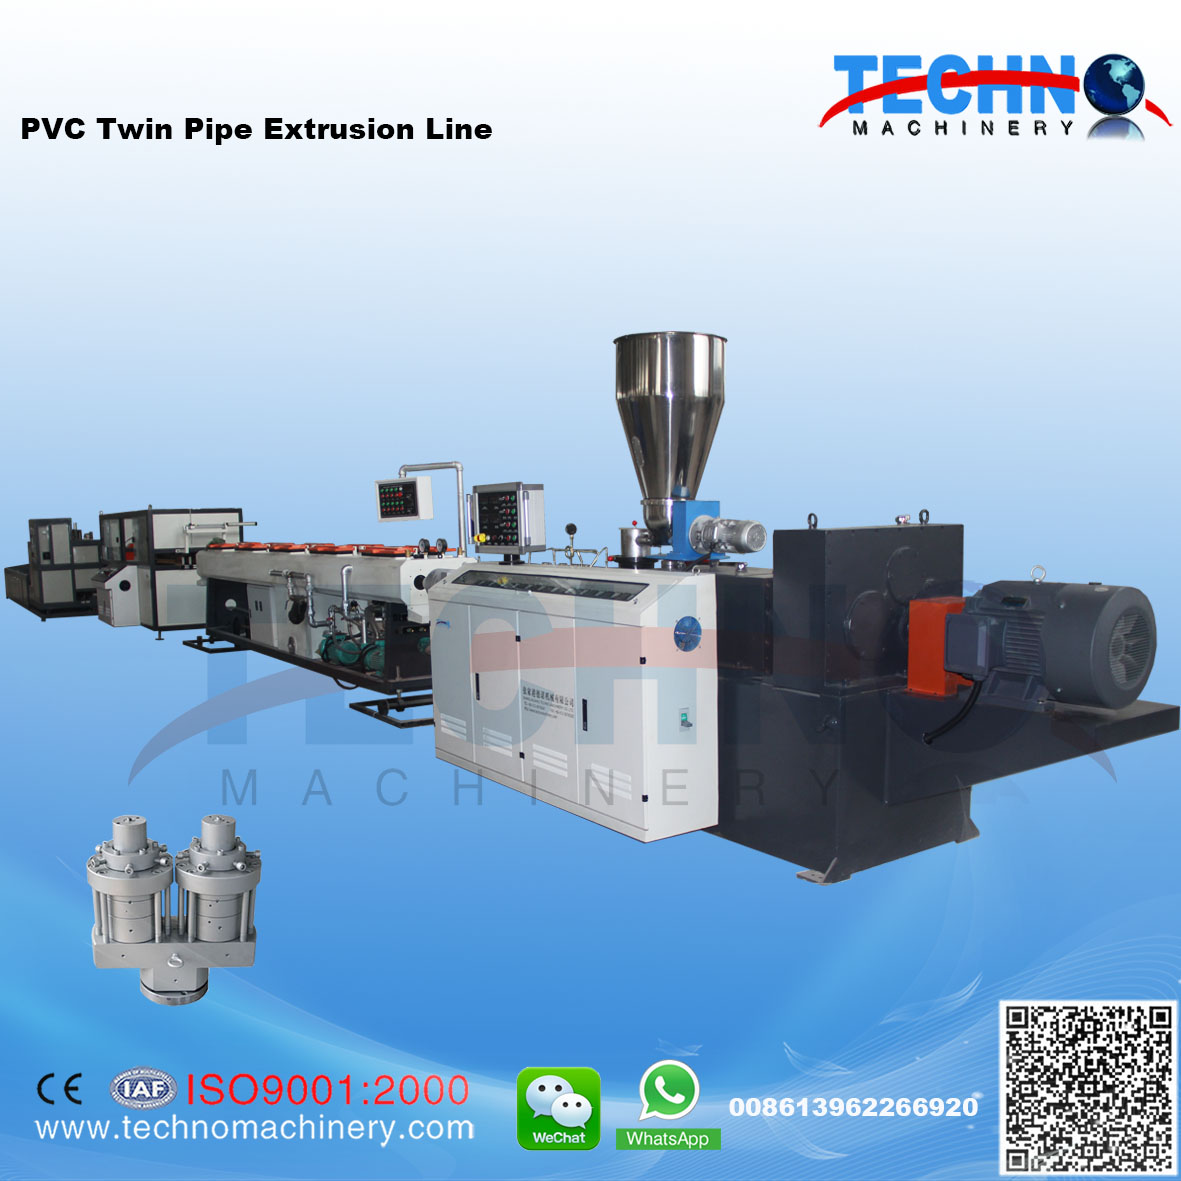 PVC Twin Pipe/Four Pipe Extrusion/Production Line